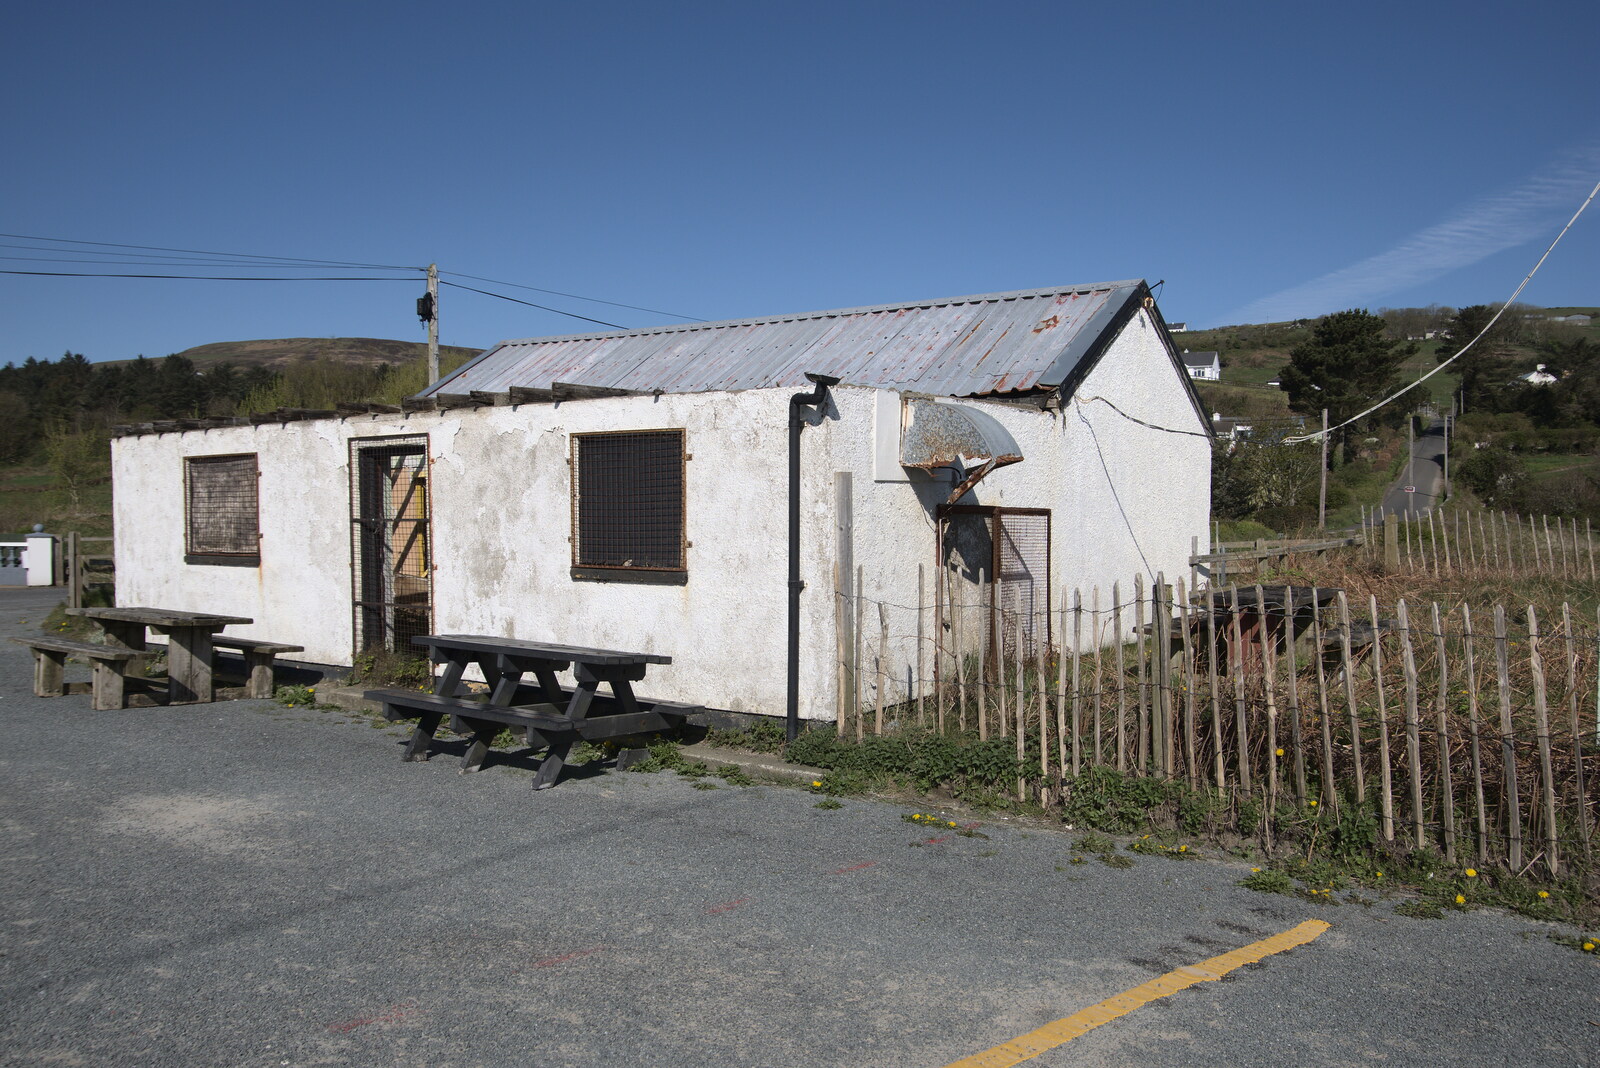 Greencastle, Doagh and Malin Head, County Donegal, Ireland - 19th April 2022: A derelict café at Shroove